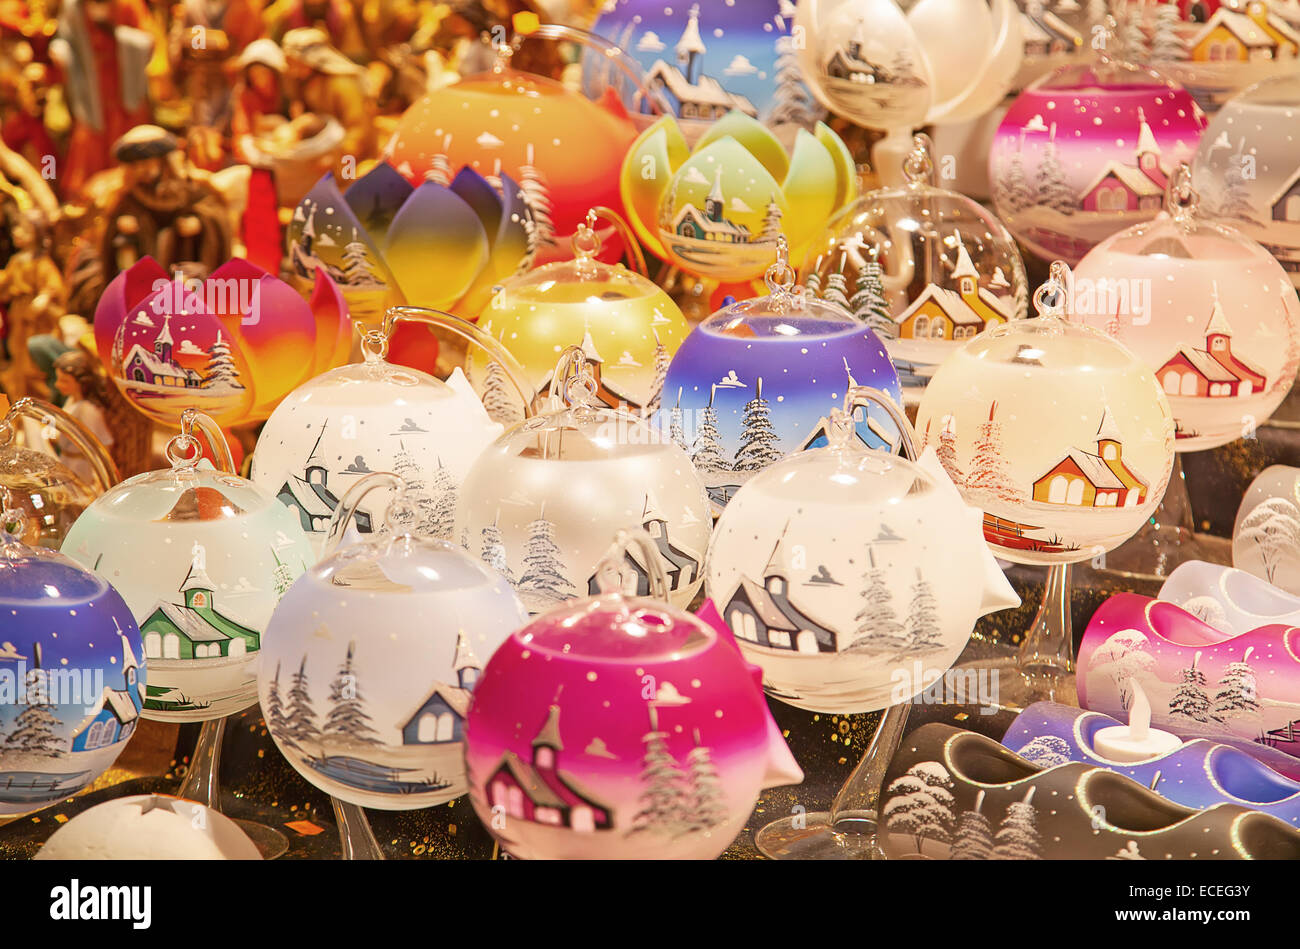 STRASSBOURG - DECEMBER 23: Colorful candlelights on the Christmas market in Strasbourg on December 23, 2013 in Strasbourg, Franc Stock Photo